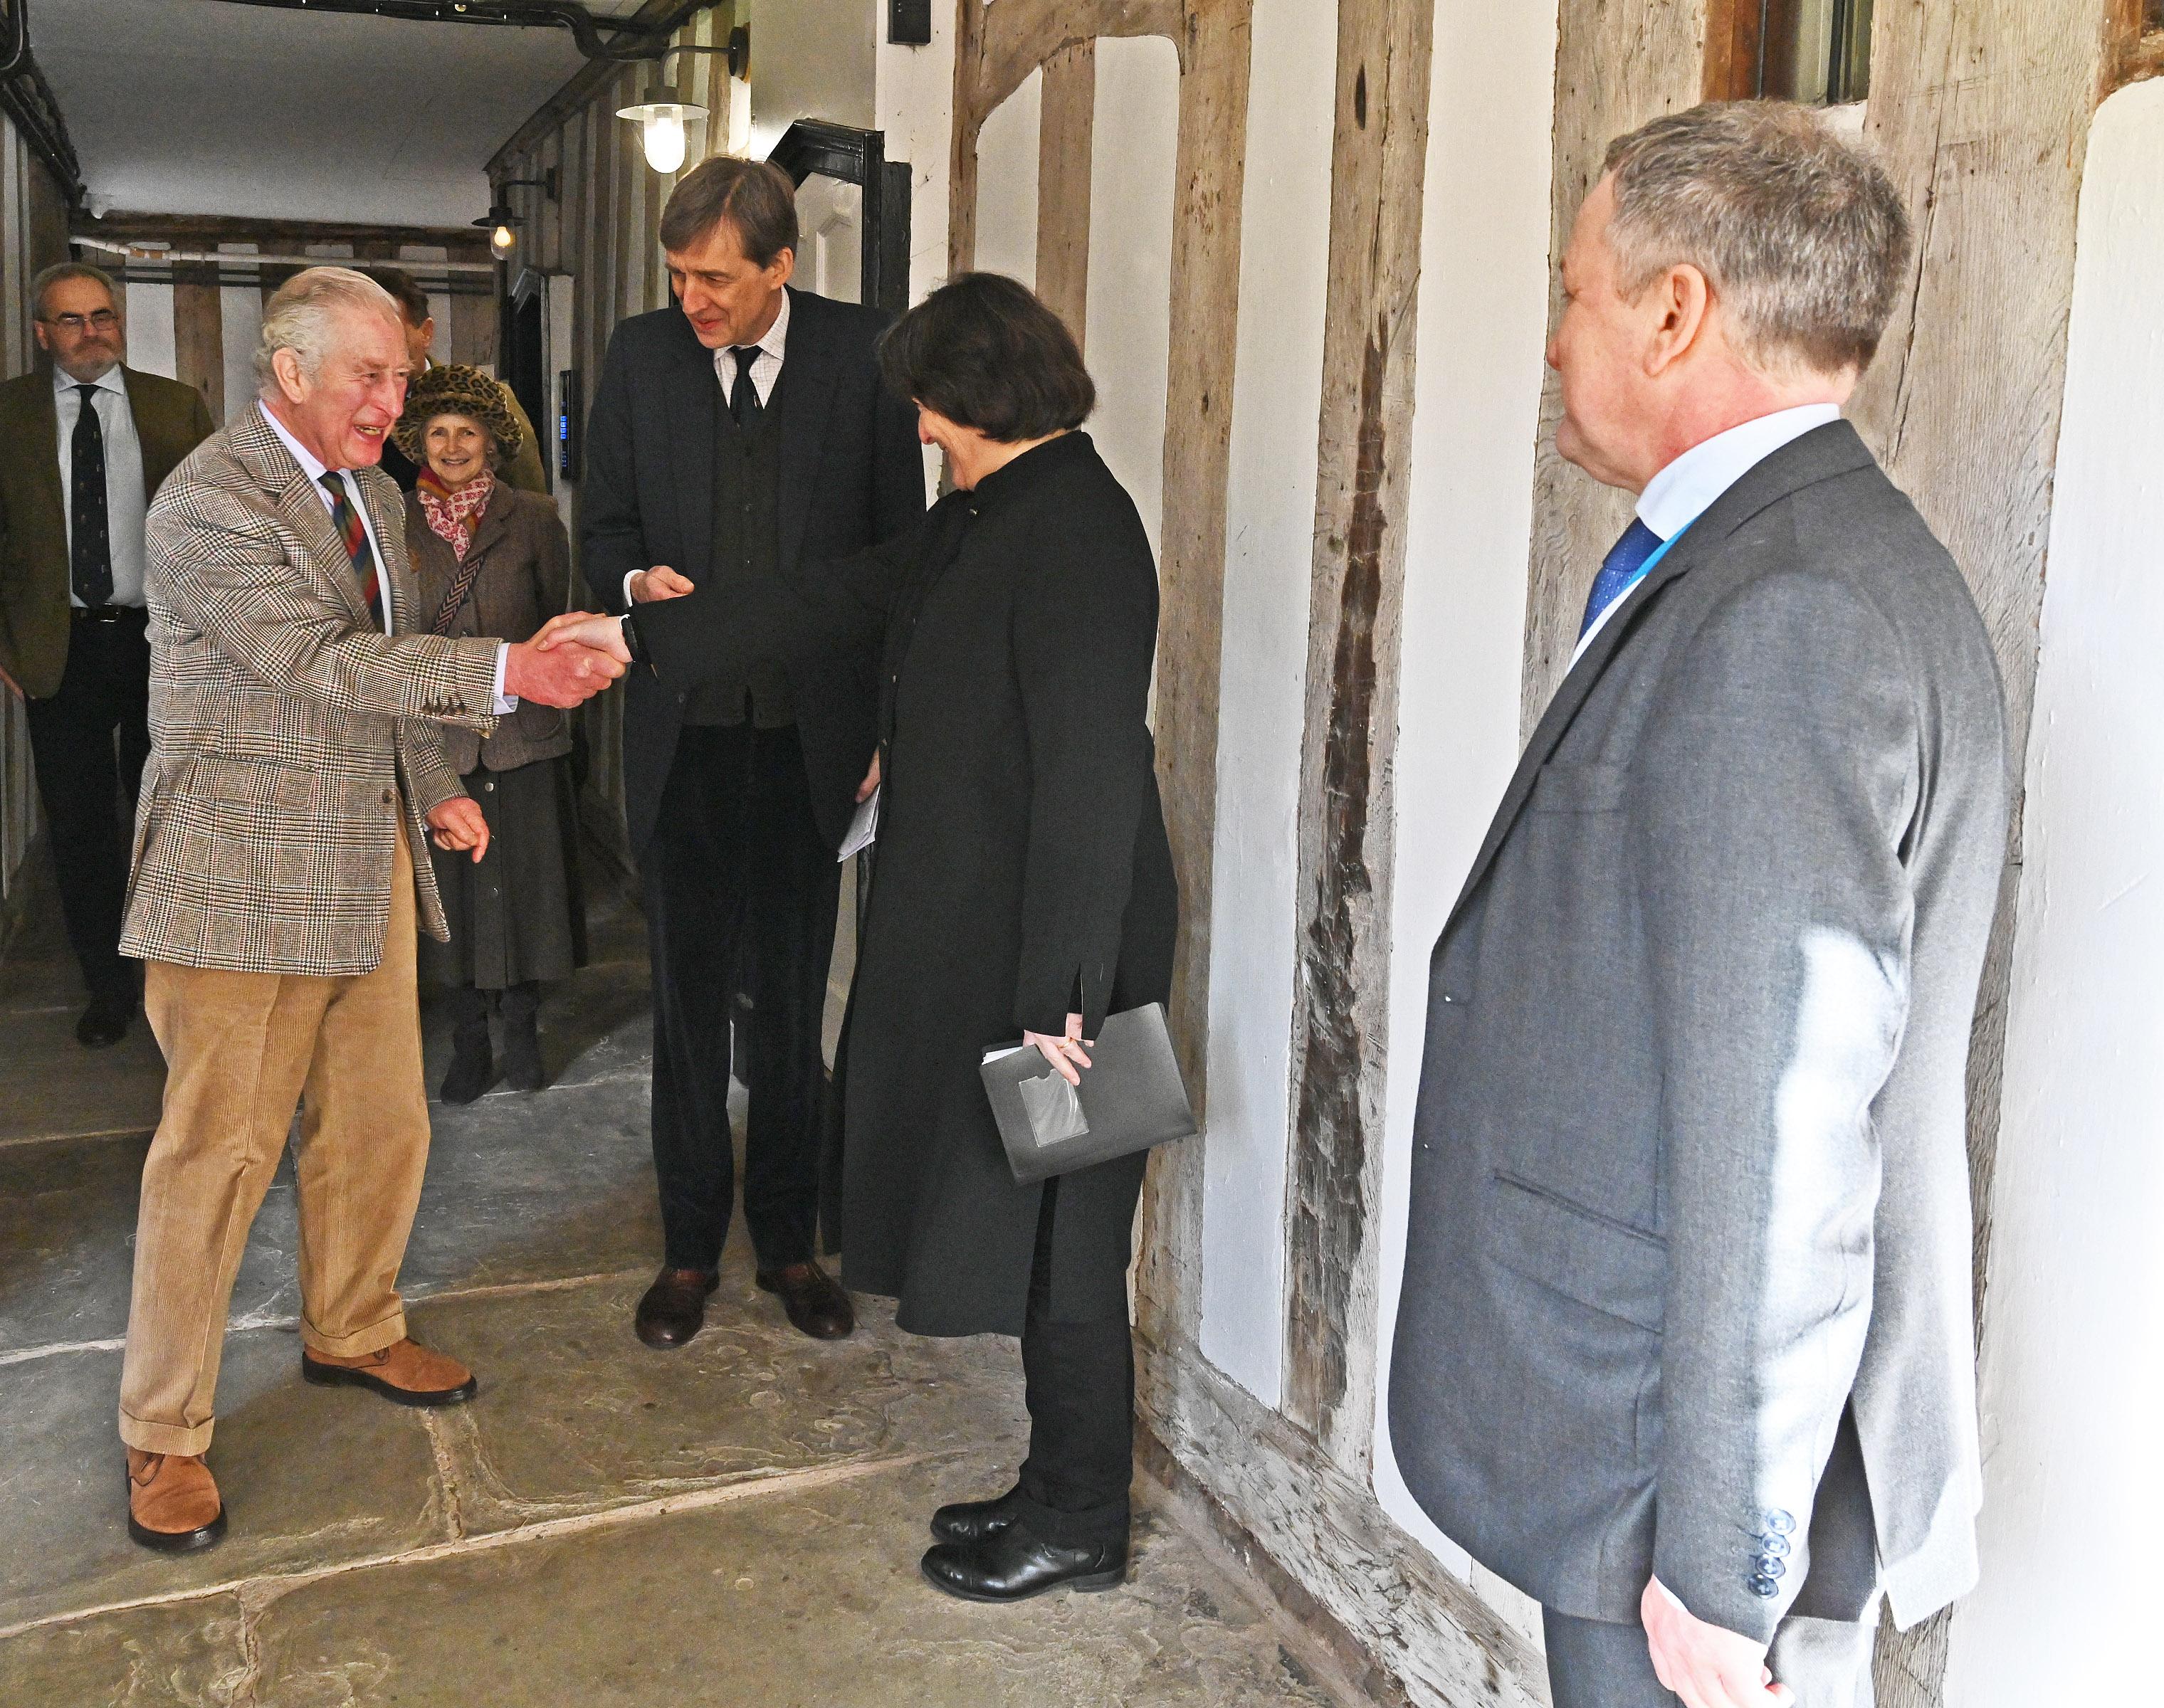 His Majesty's Royal Highness Prince Charles visits Hereford Cathedral